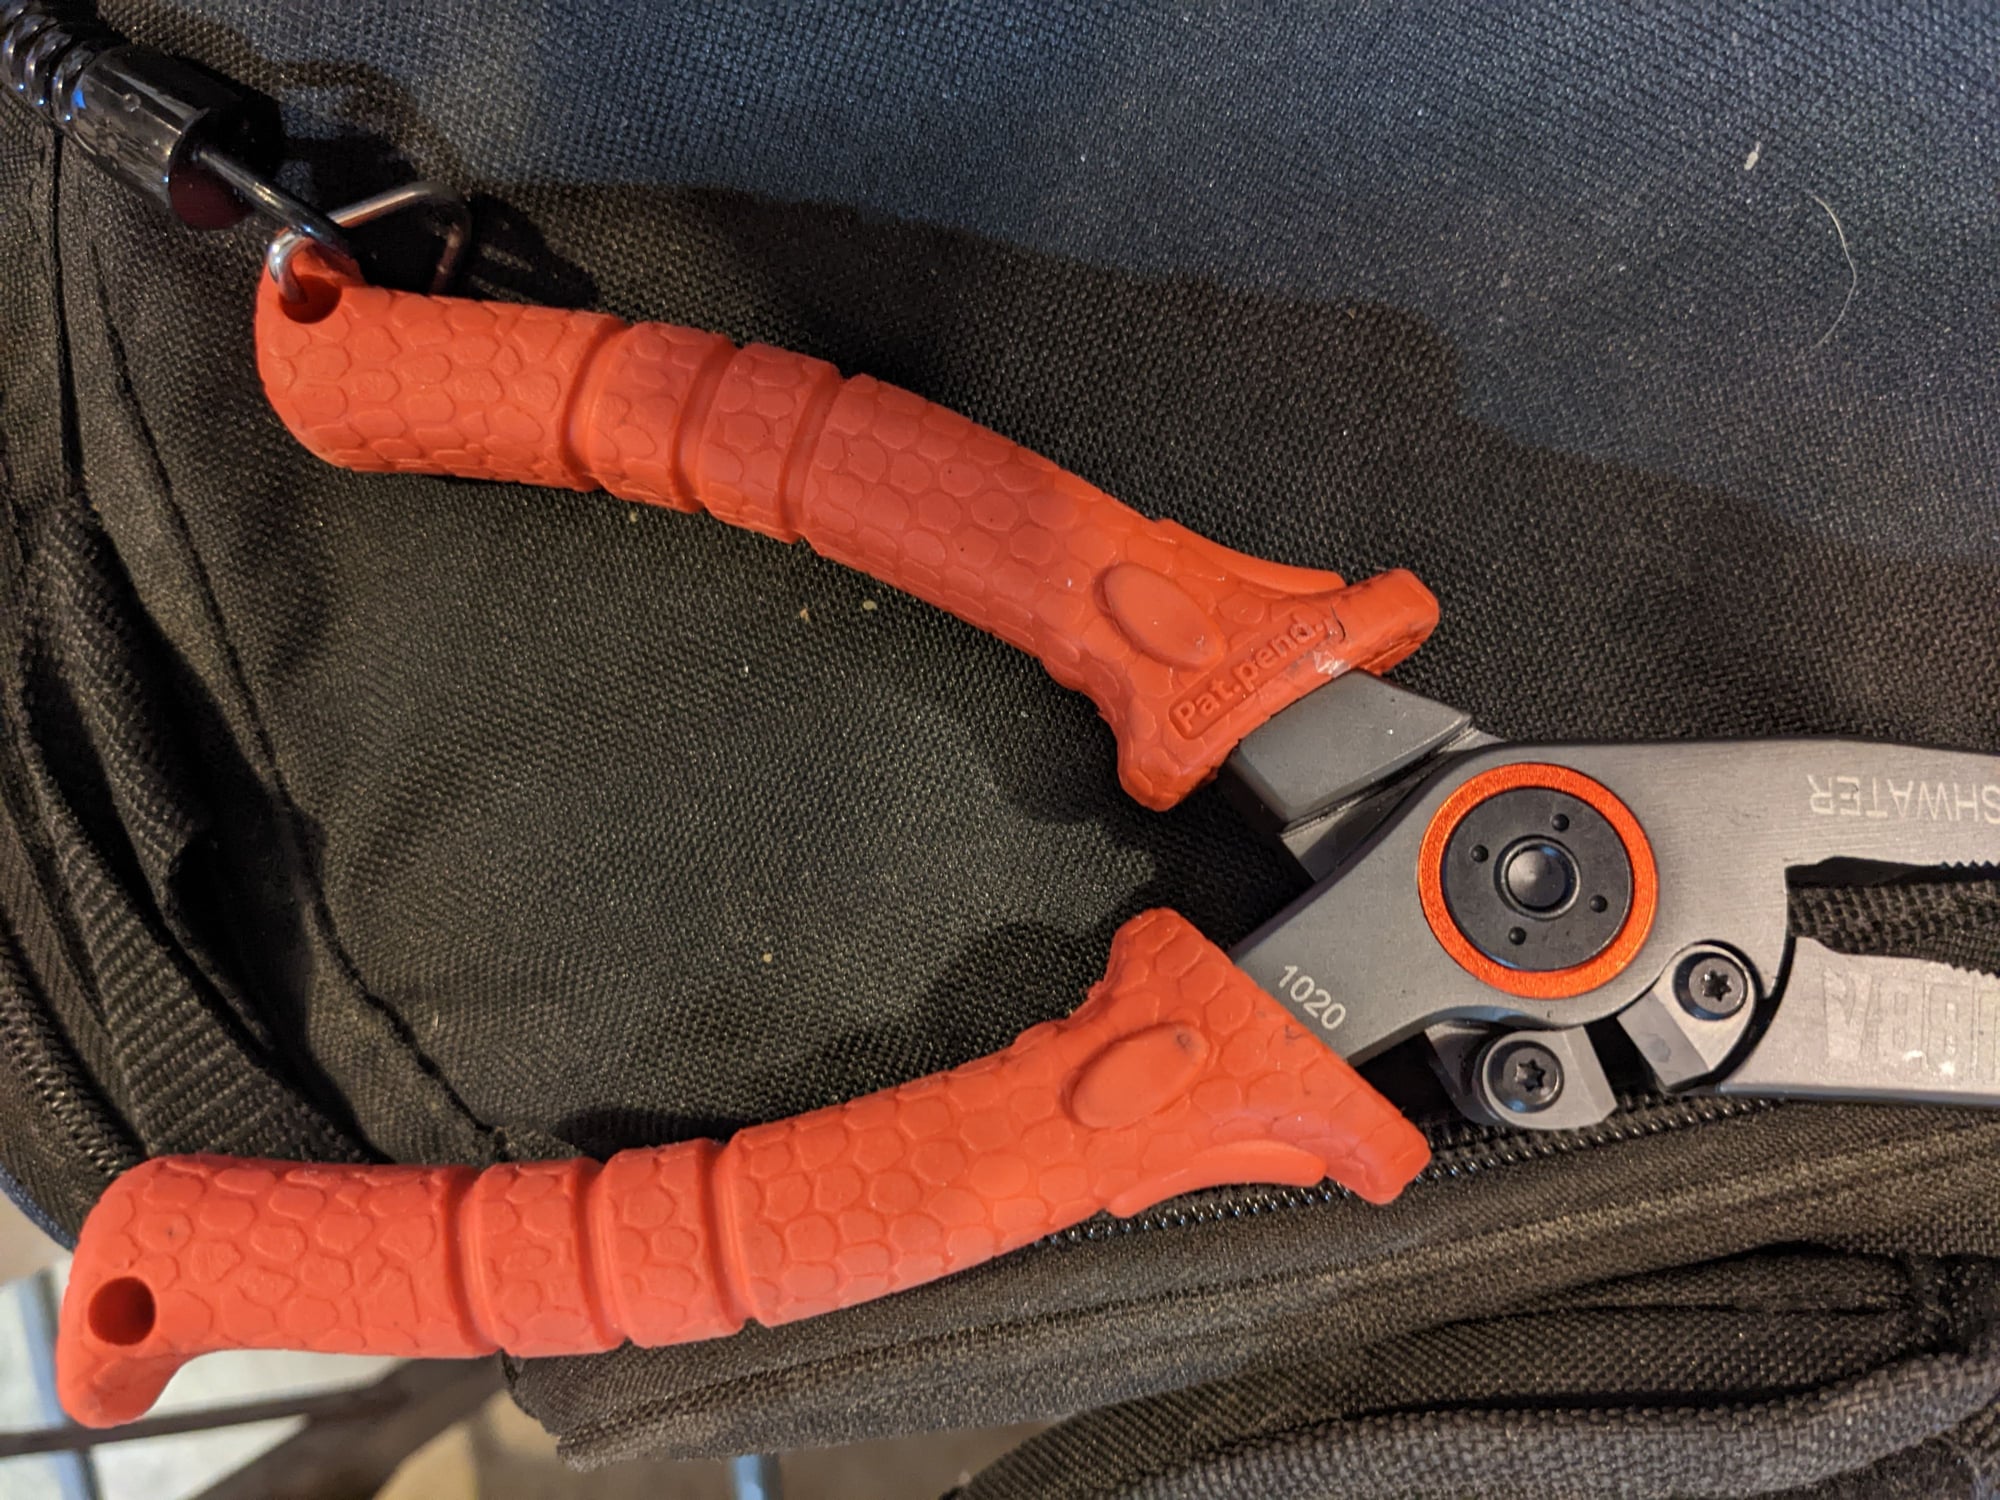 Bubba Blade pliers - The Hull Truth - Boating and Fishing Forum